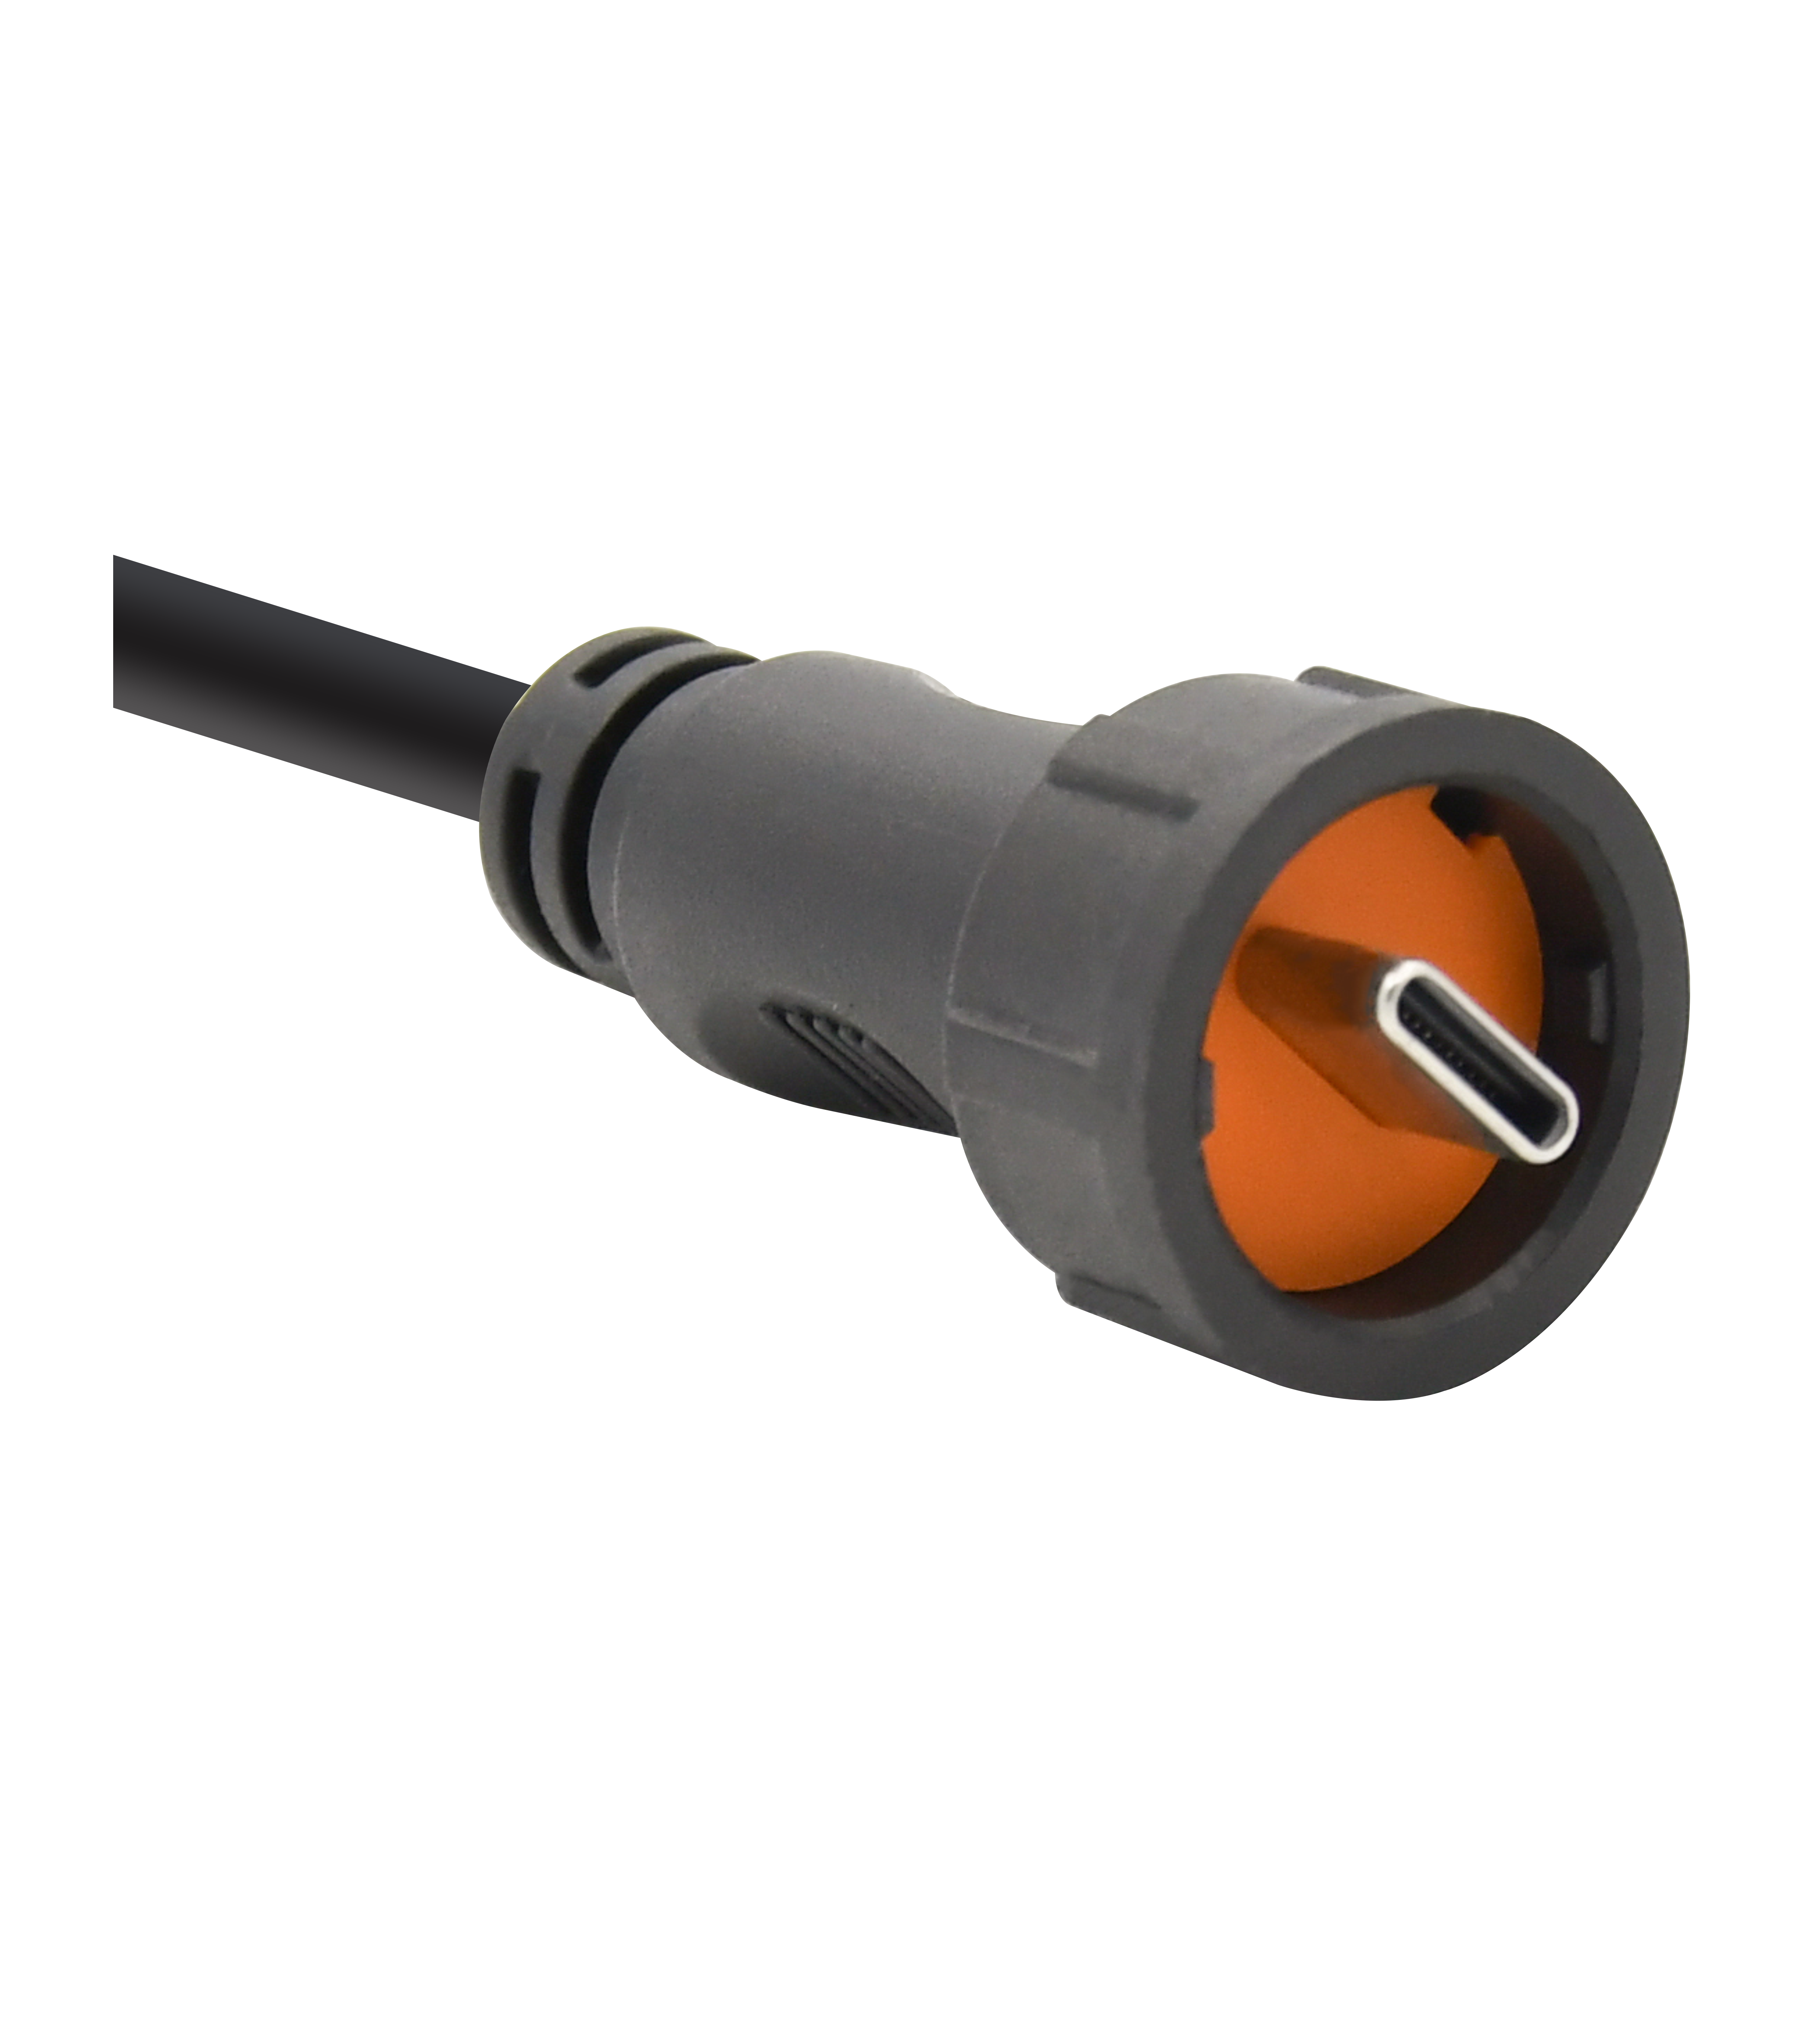 USB Connector Solutions: Rigoal's Comprehensive Range for Industrial Applications